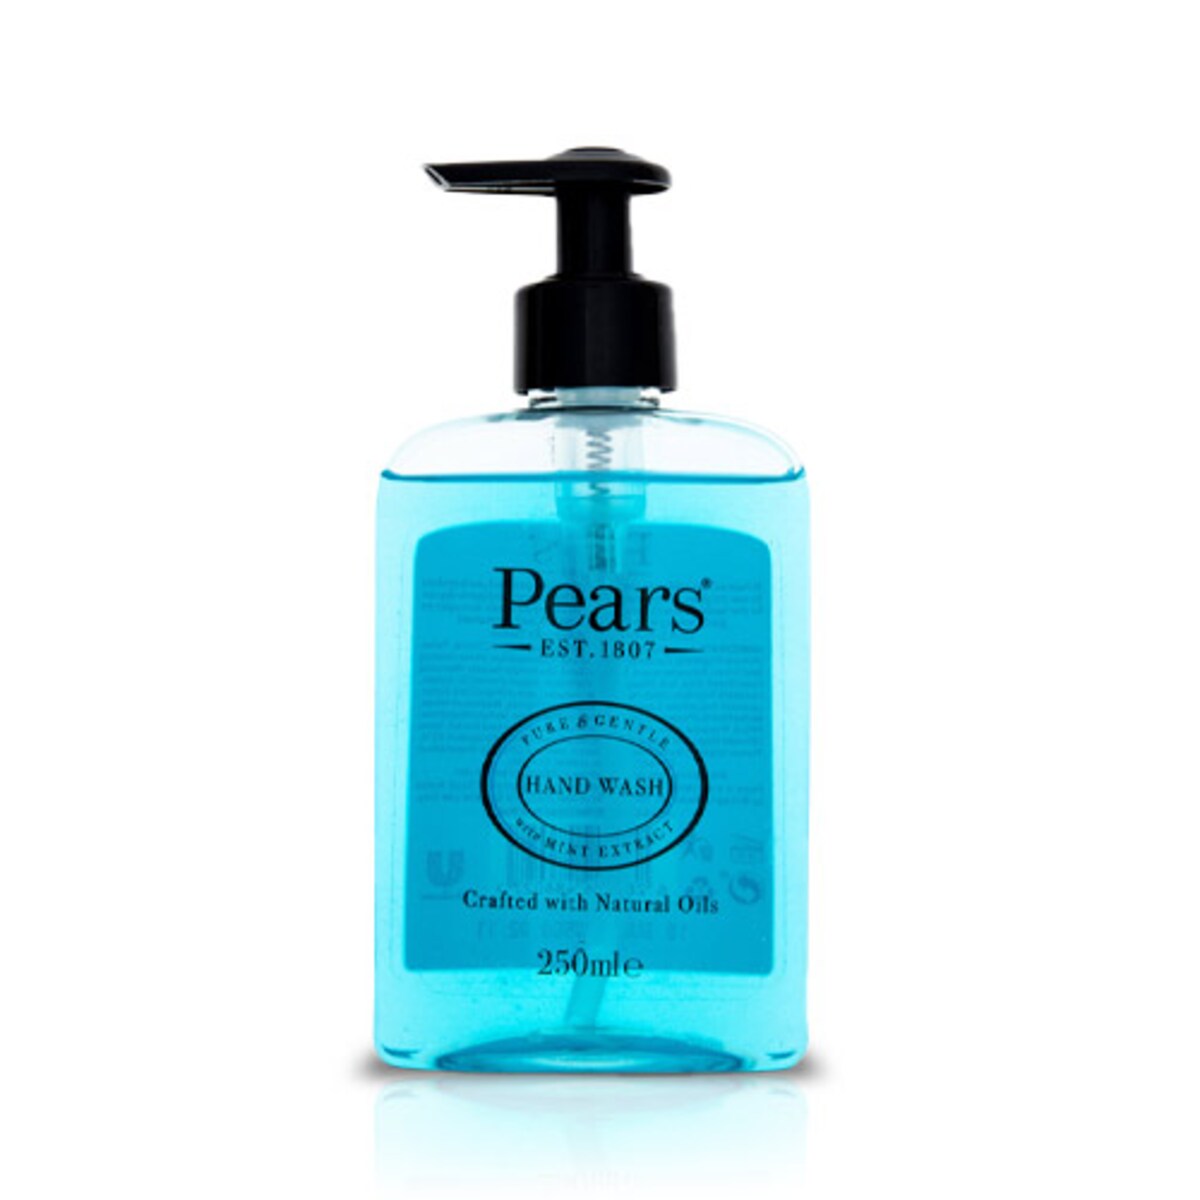 Pears Mint Extract Hand Wash 250ml